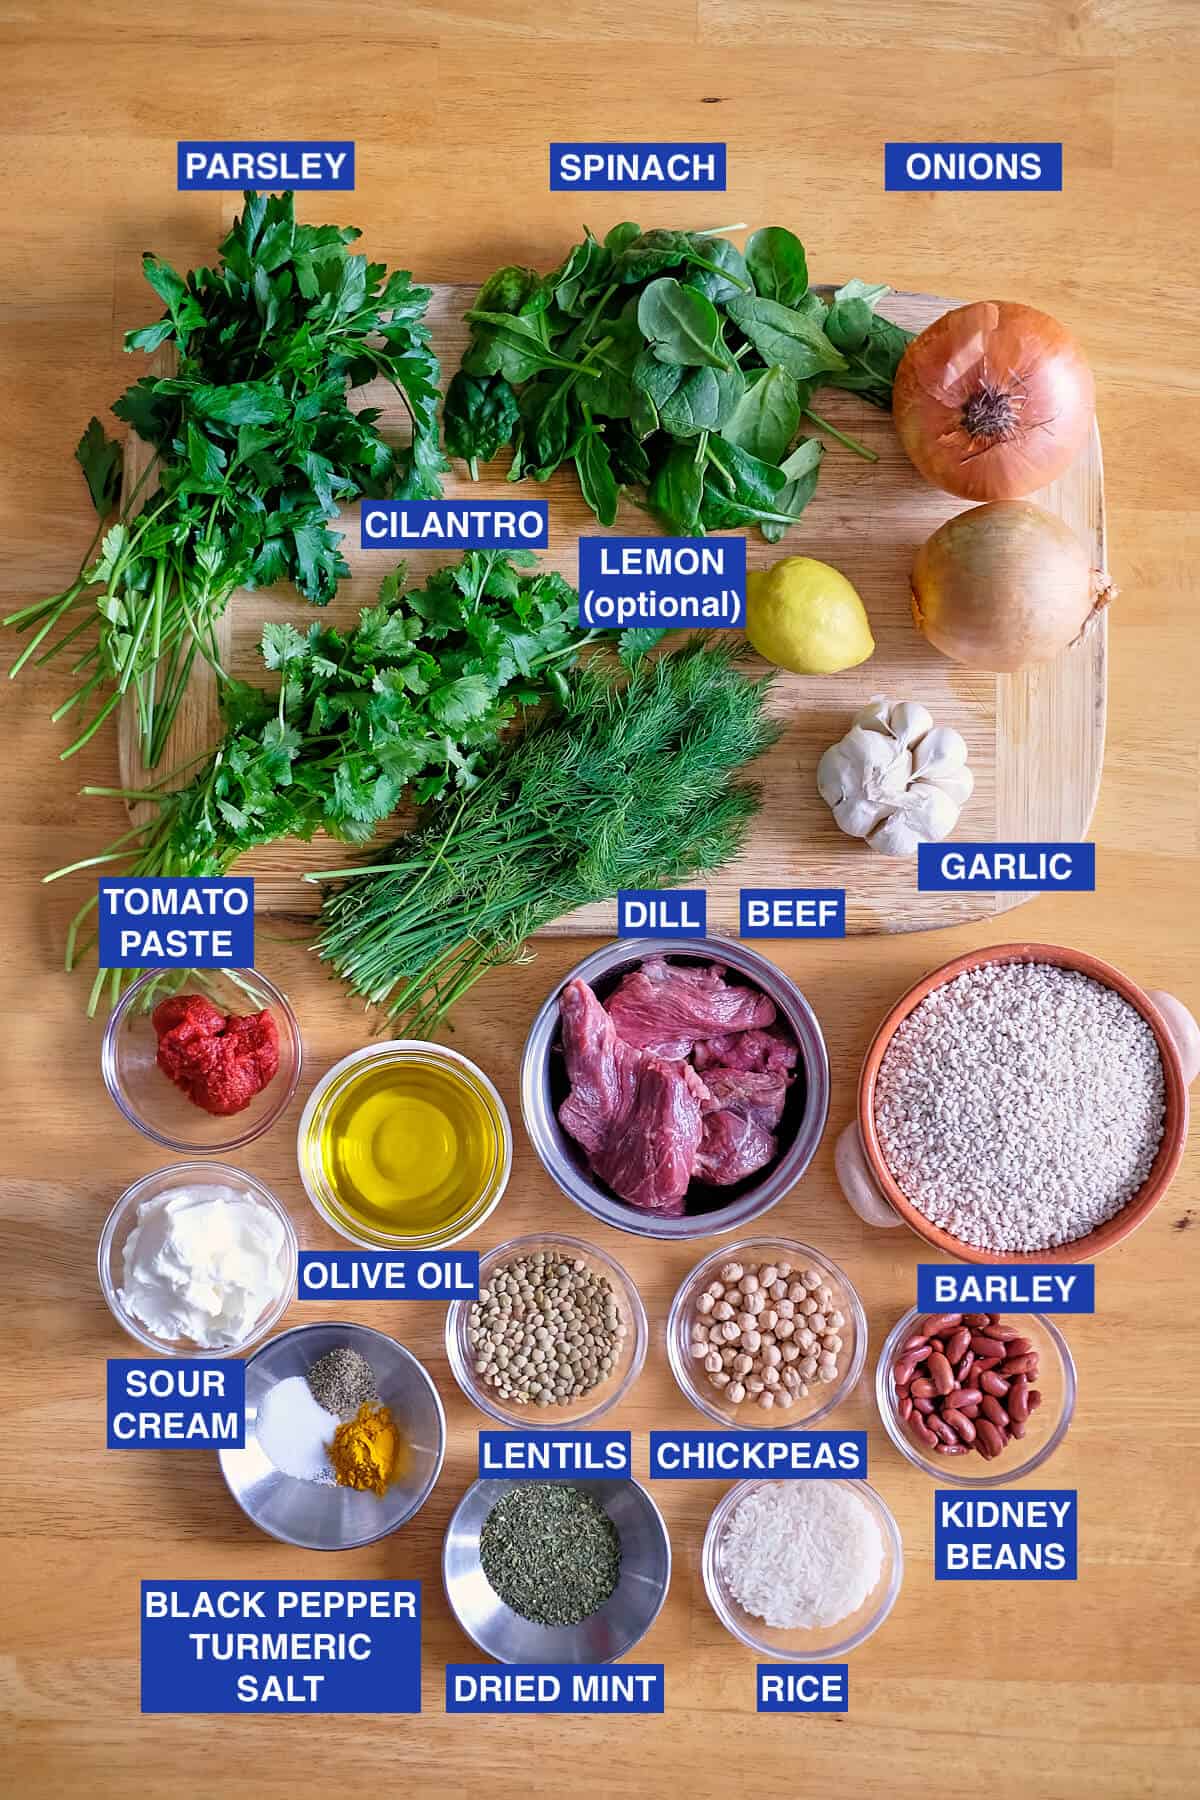 Ingredients used for making the soup.